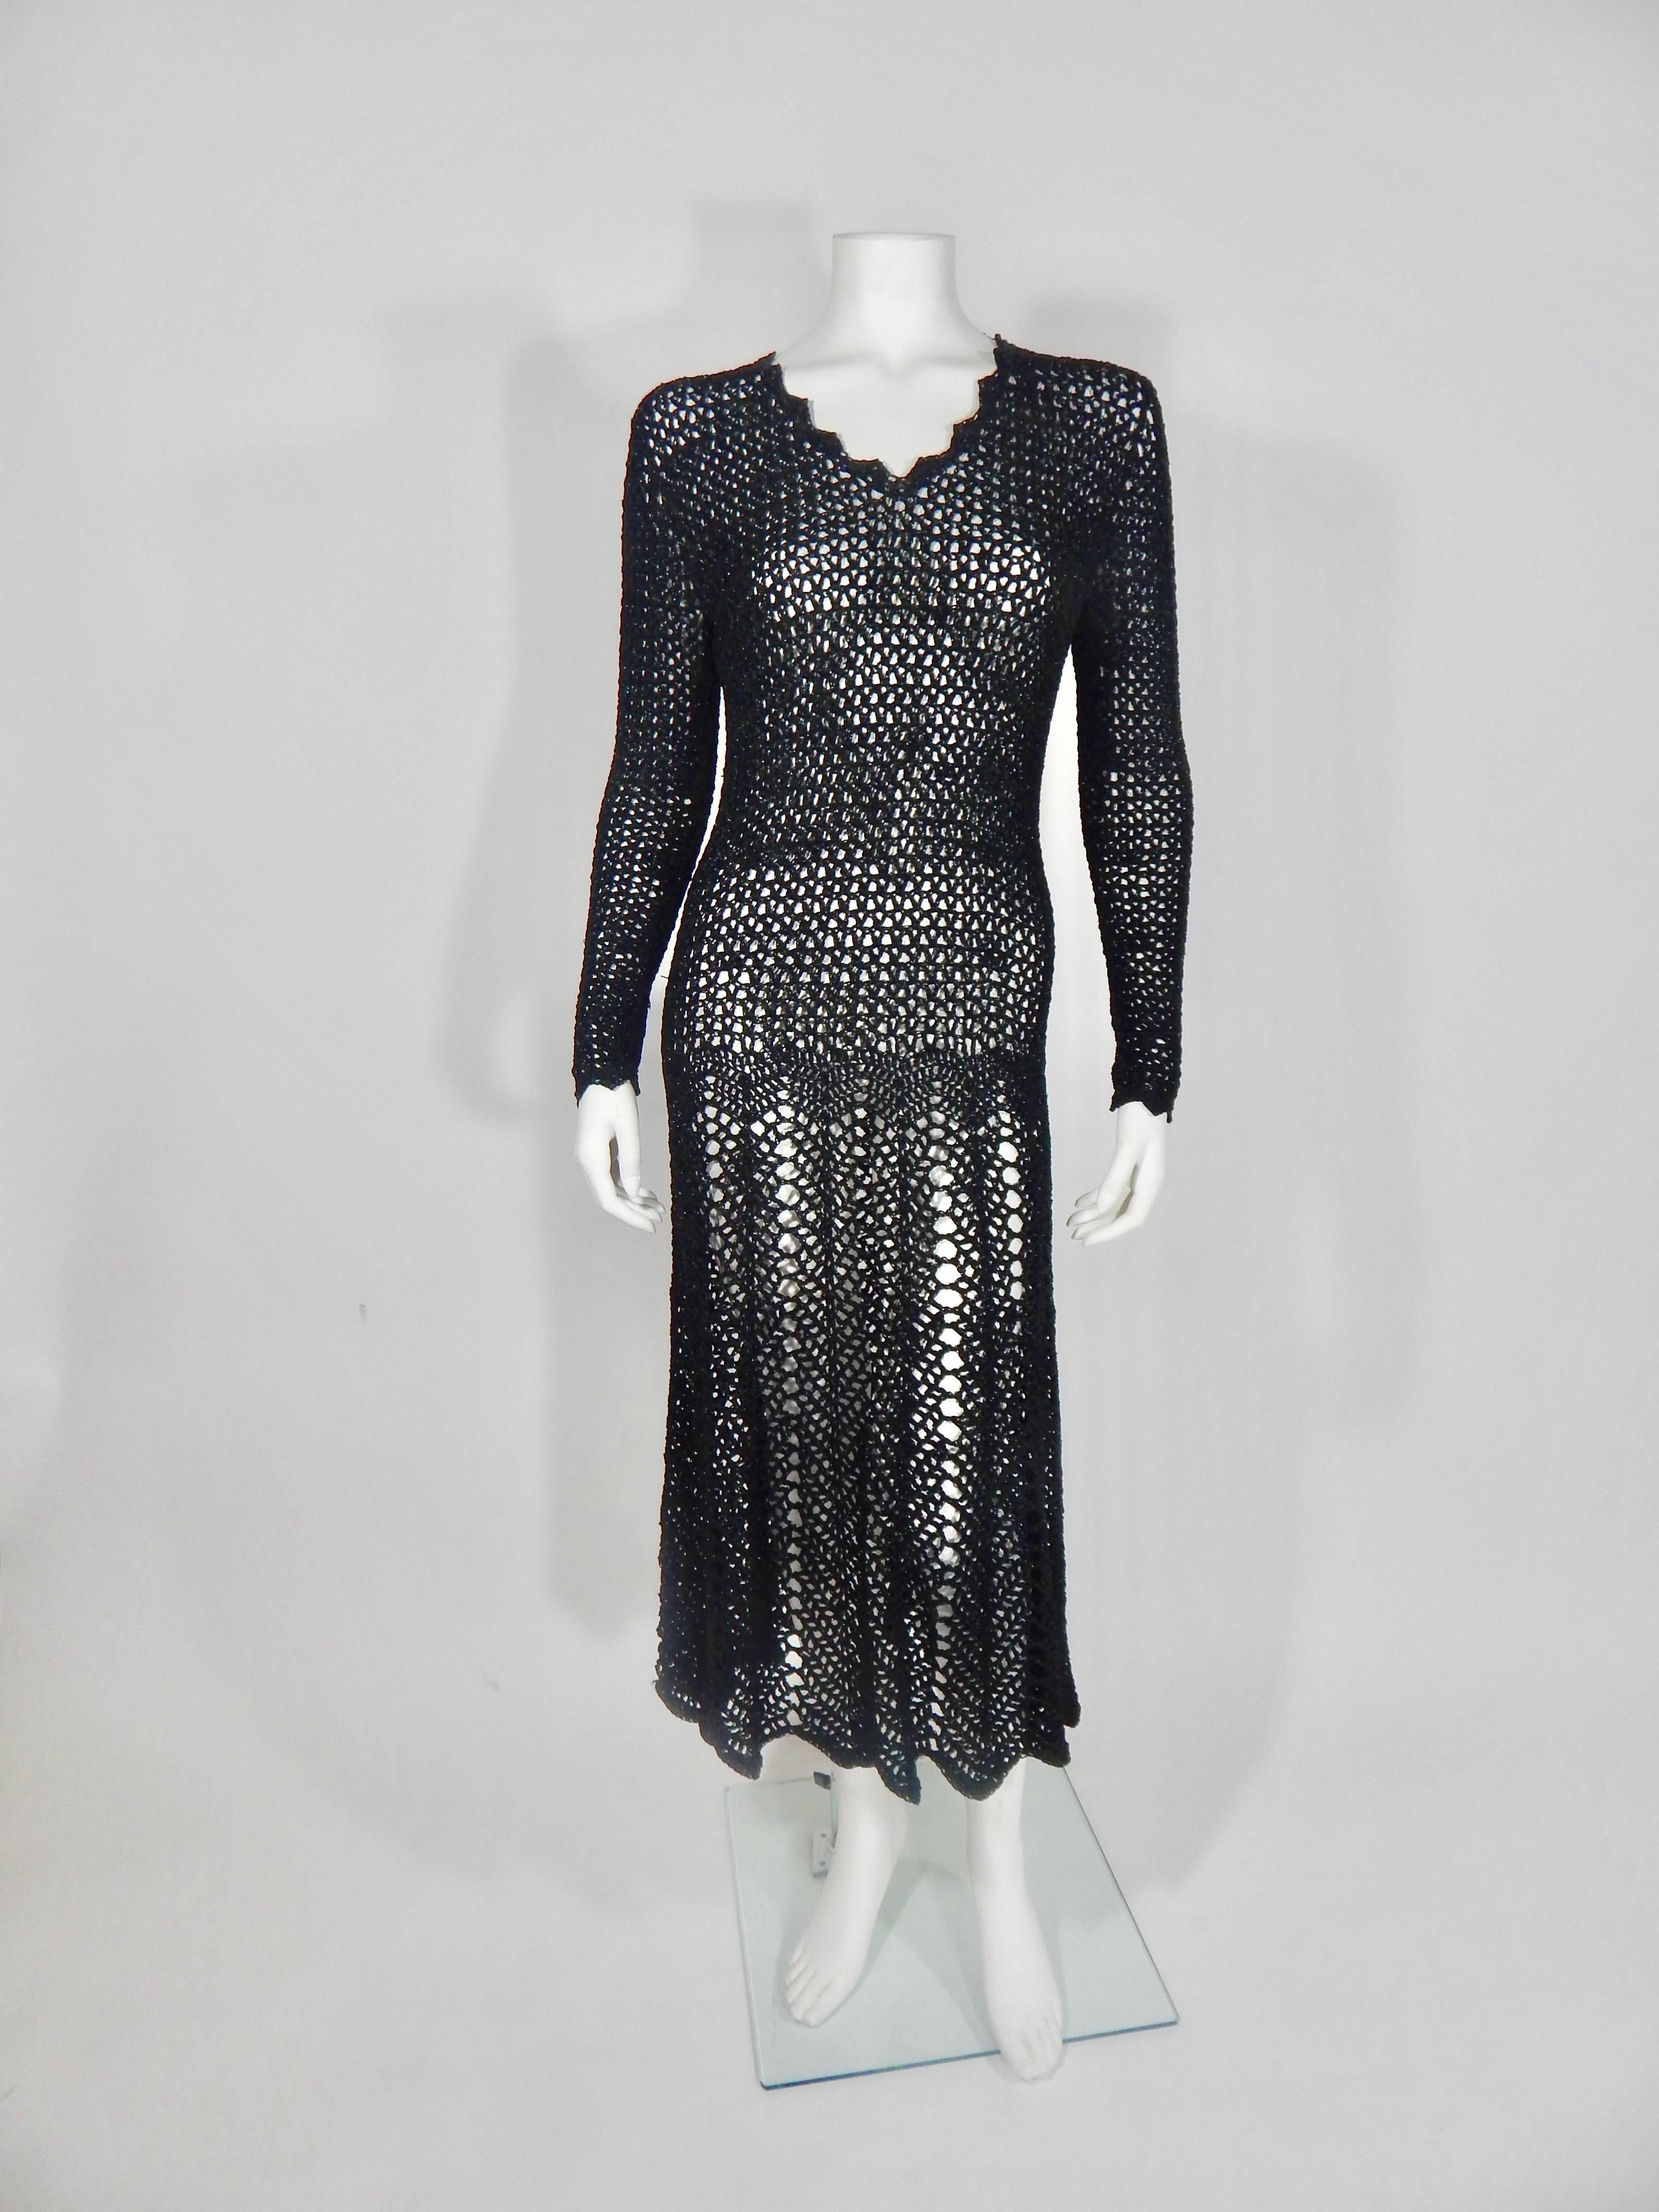 1920s Black Crochet Dress. Approximate modern day size 2 / 4. Photos show with and without waist tie. Excellent Condition.

*We offer complimentary free domestic shipping for this item